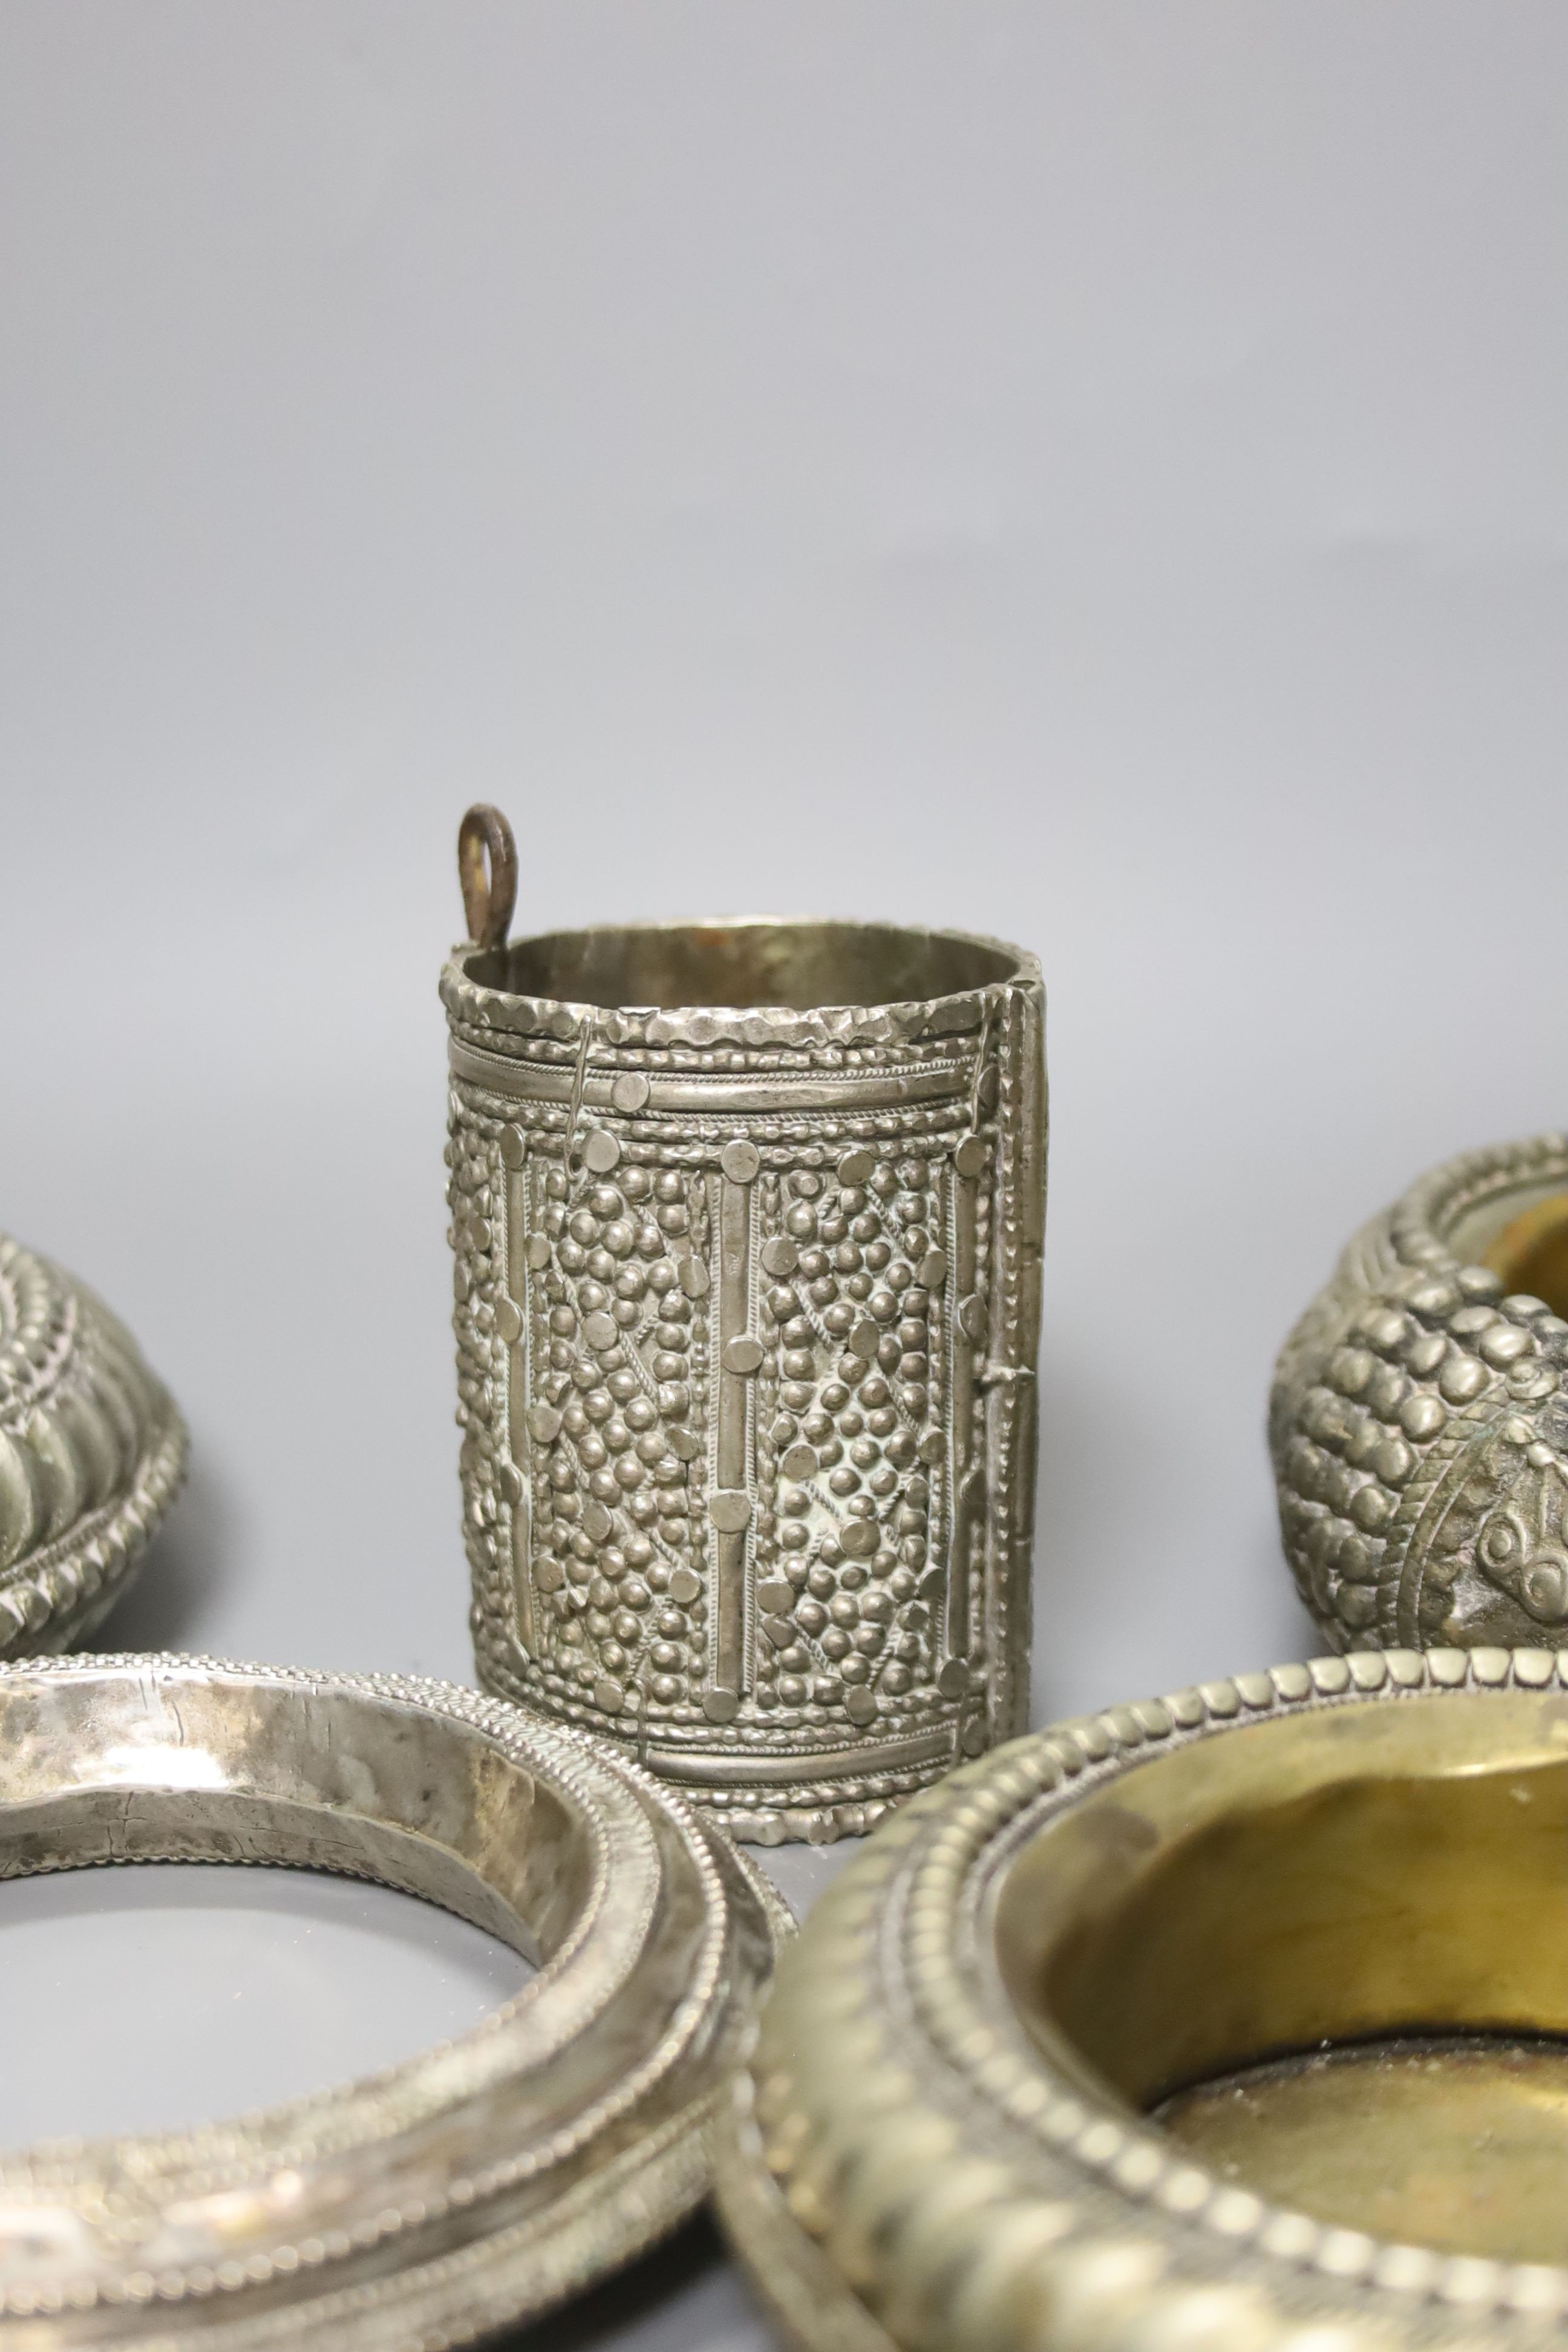 Eight Persian gulf silver plated nickel ankle bracelets - Image 4 of 4